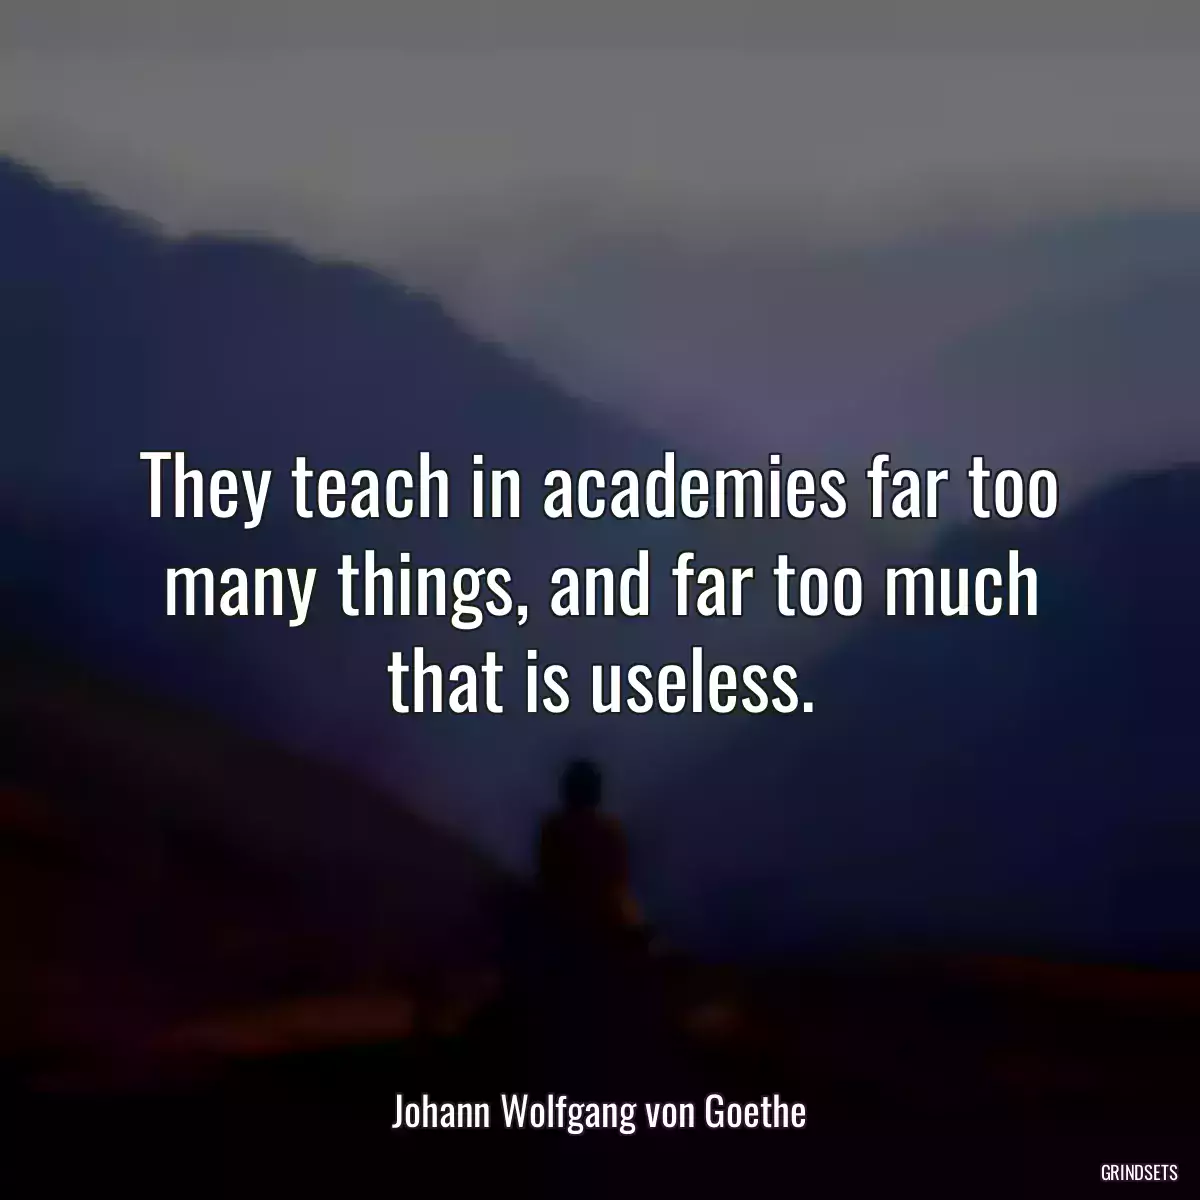 They teach in academies far too many things, and far too much that is useless.